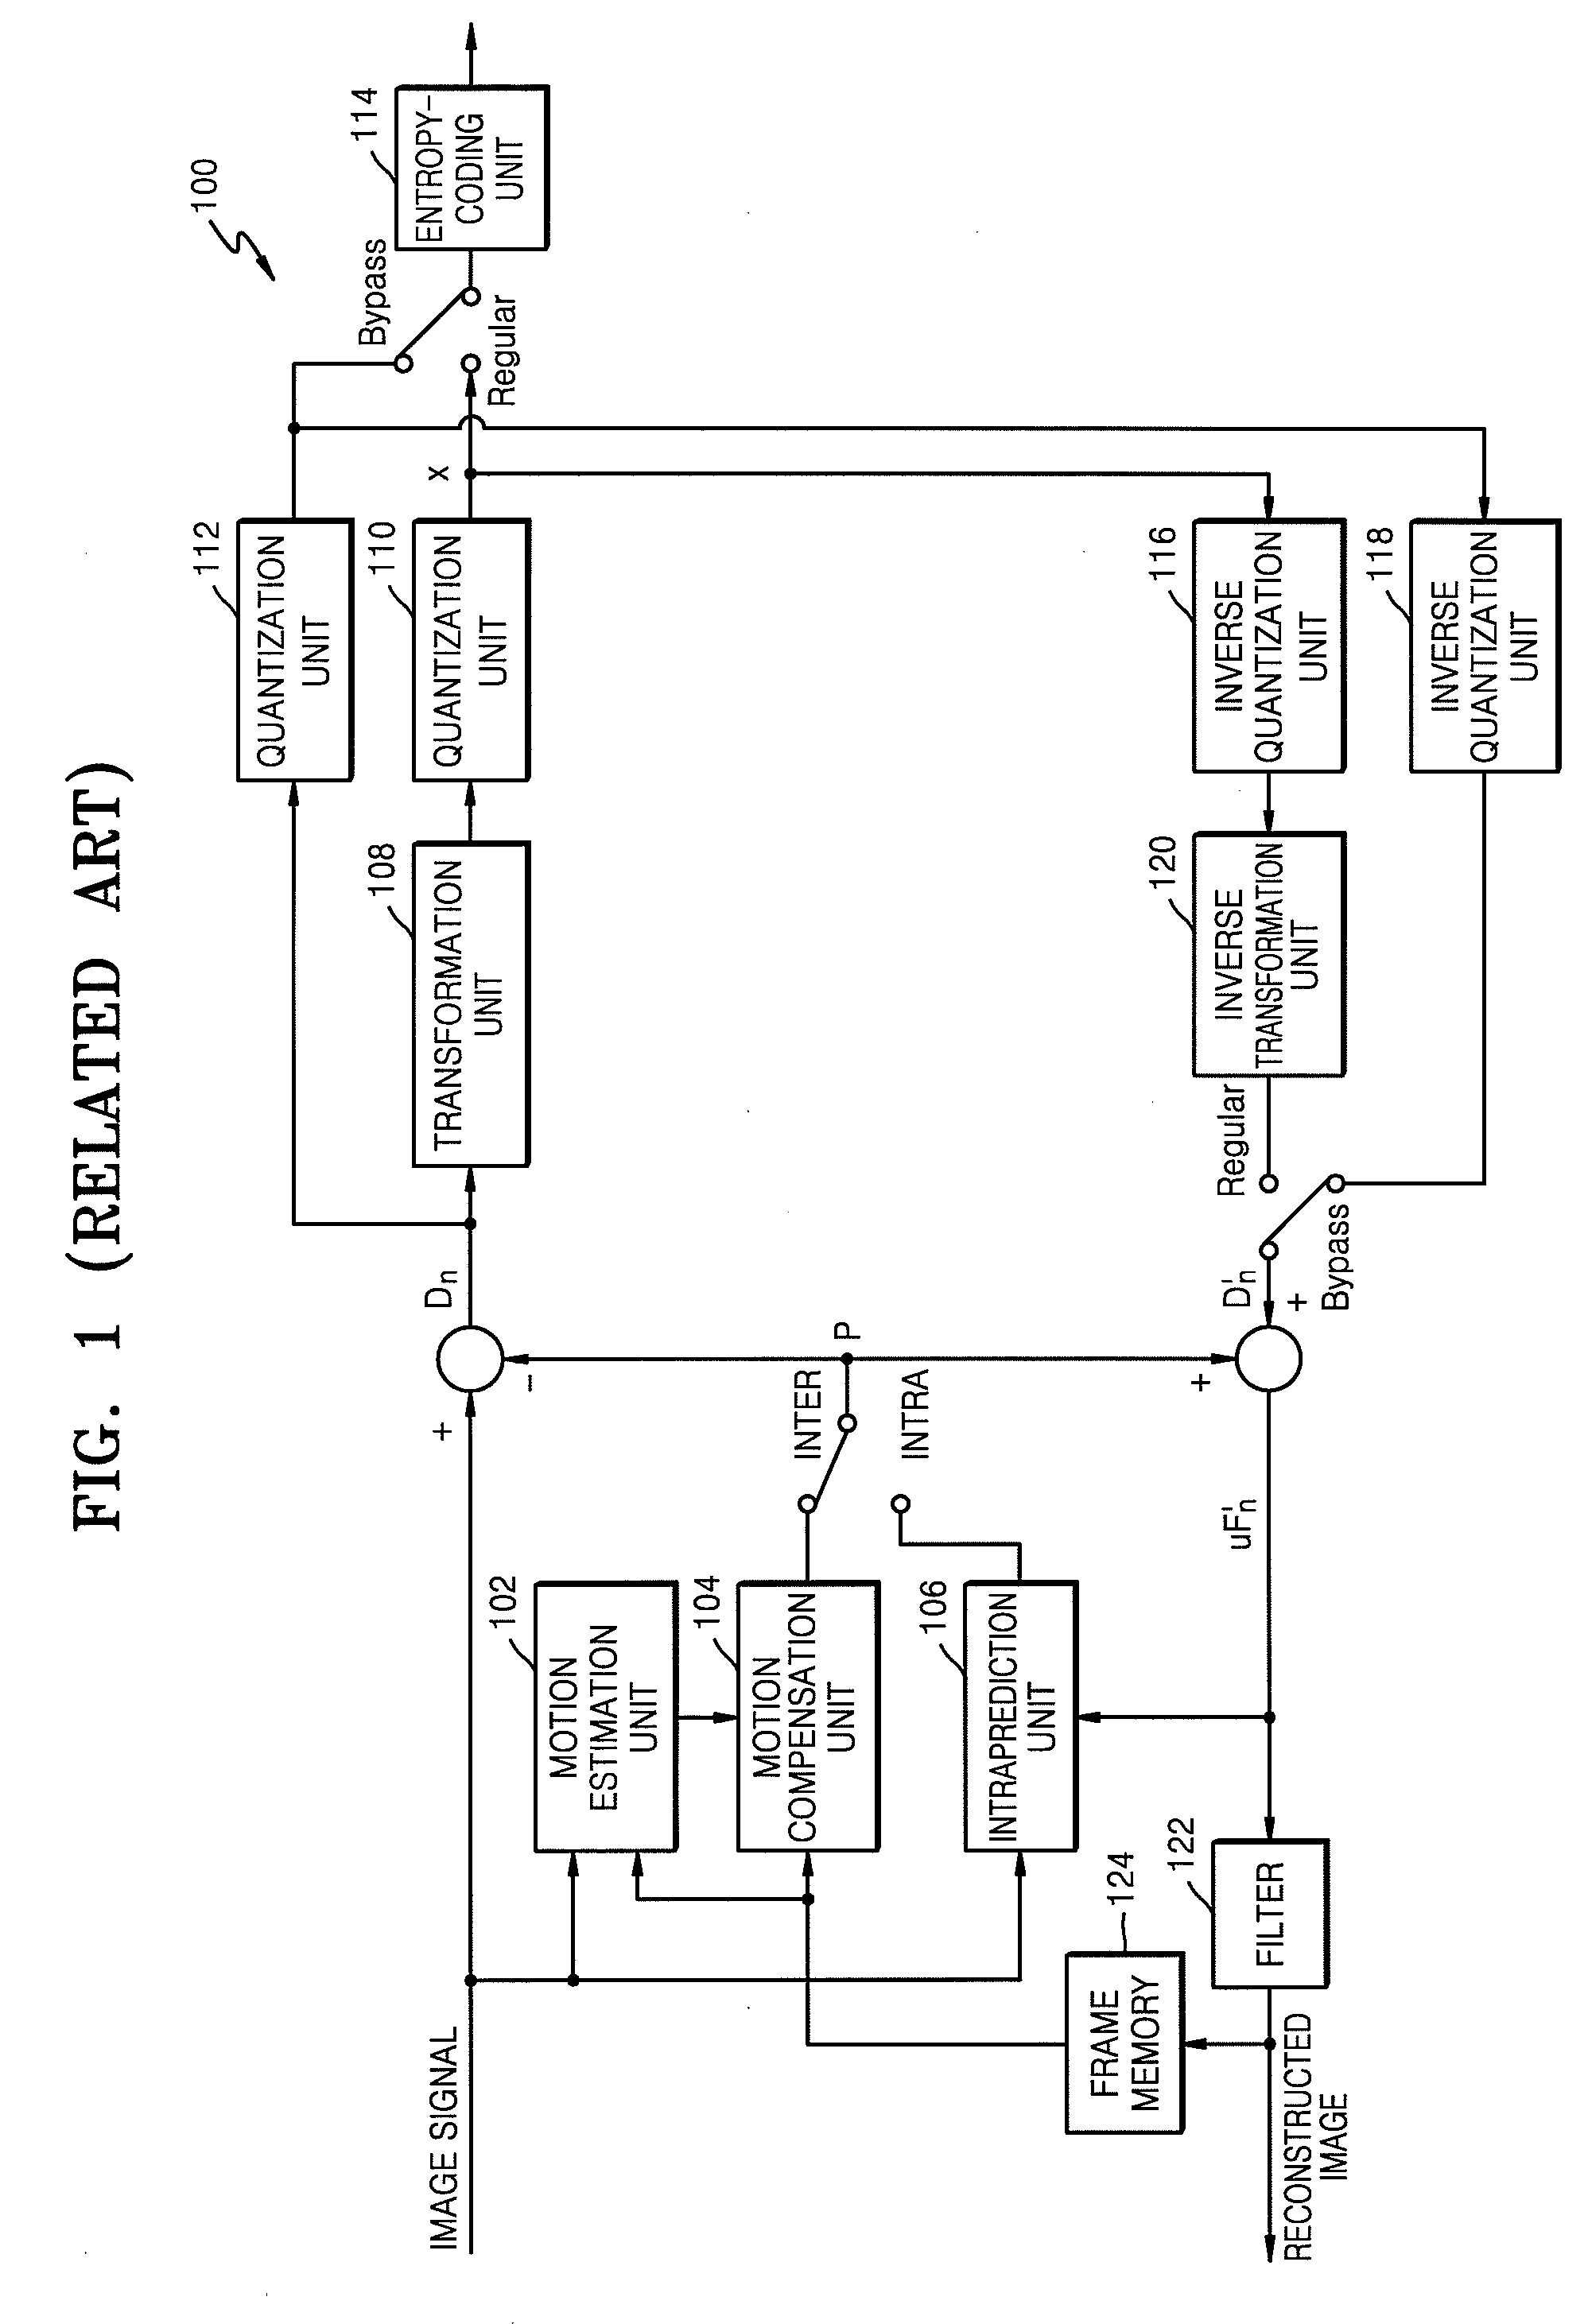 Method and apparatus for encoding and decoding image using pixel-based context model